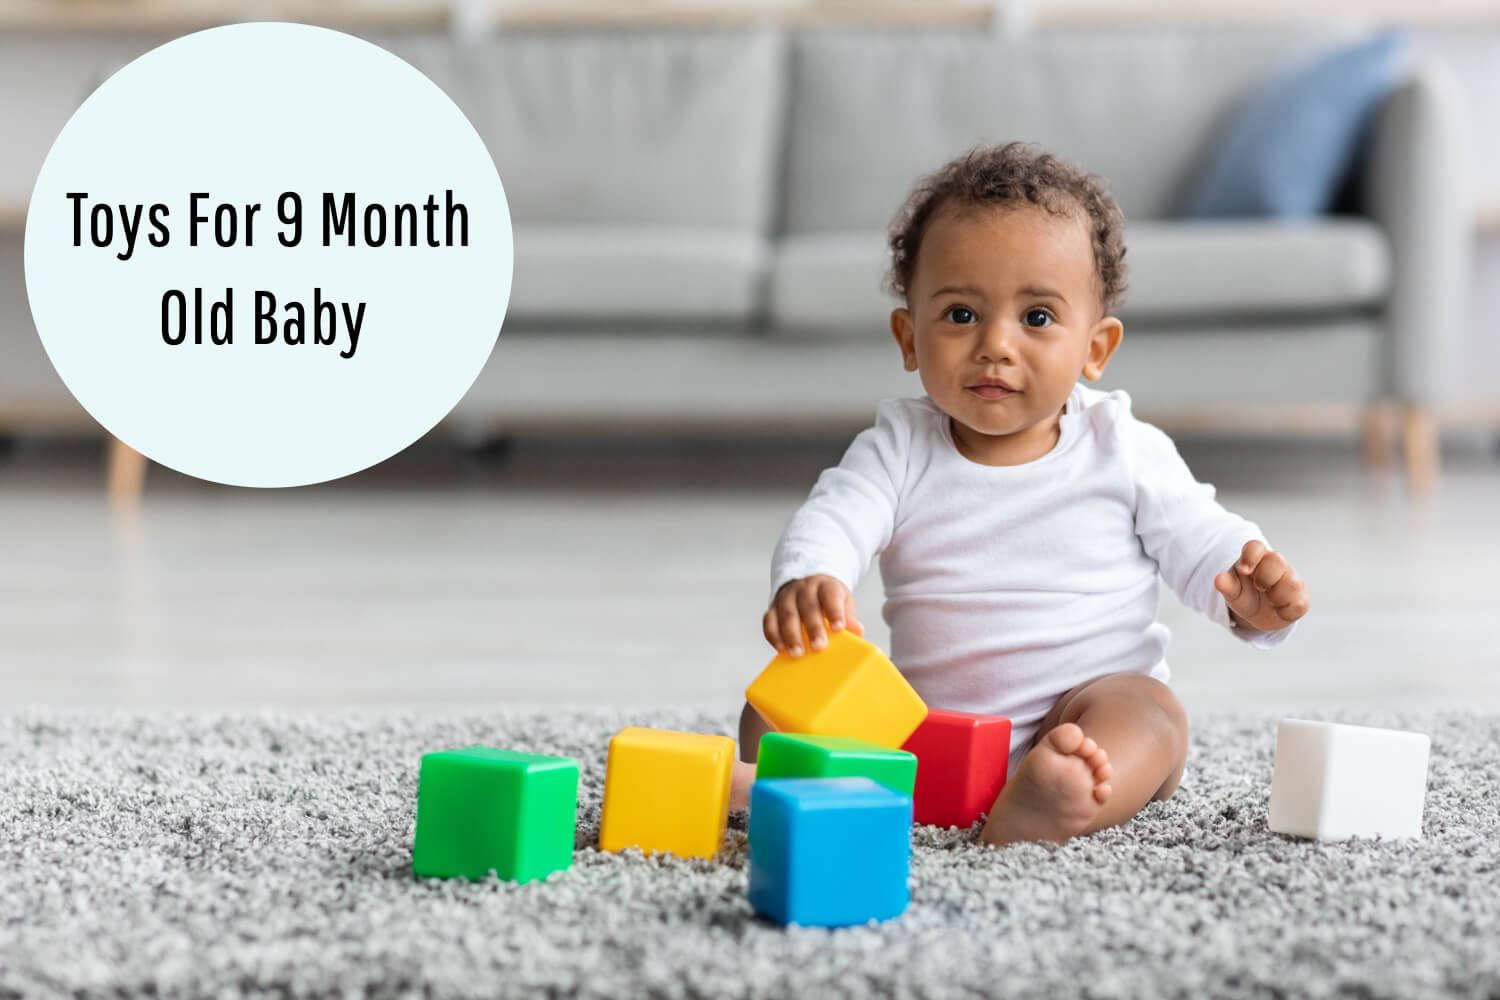 Toys For 9 Month Old Baby – Types, Benefits and What to Buy